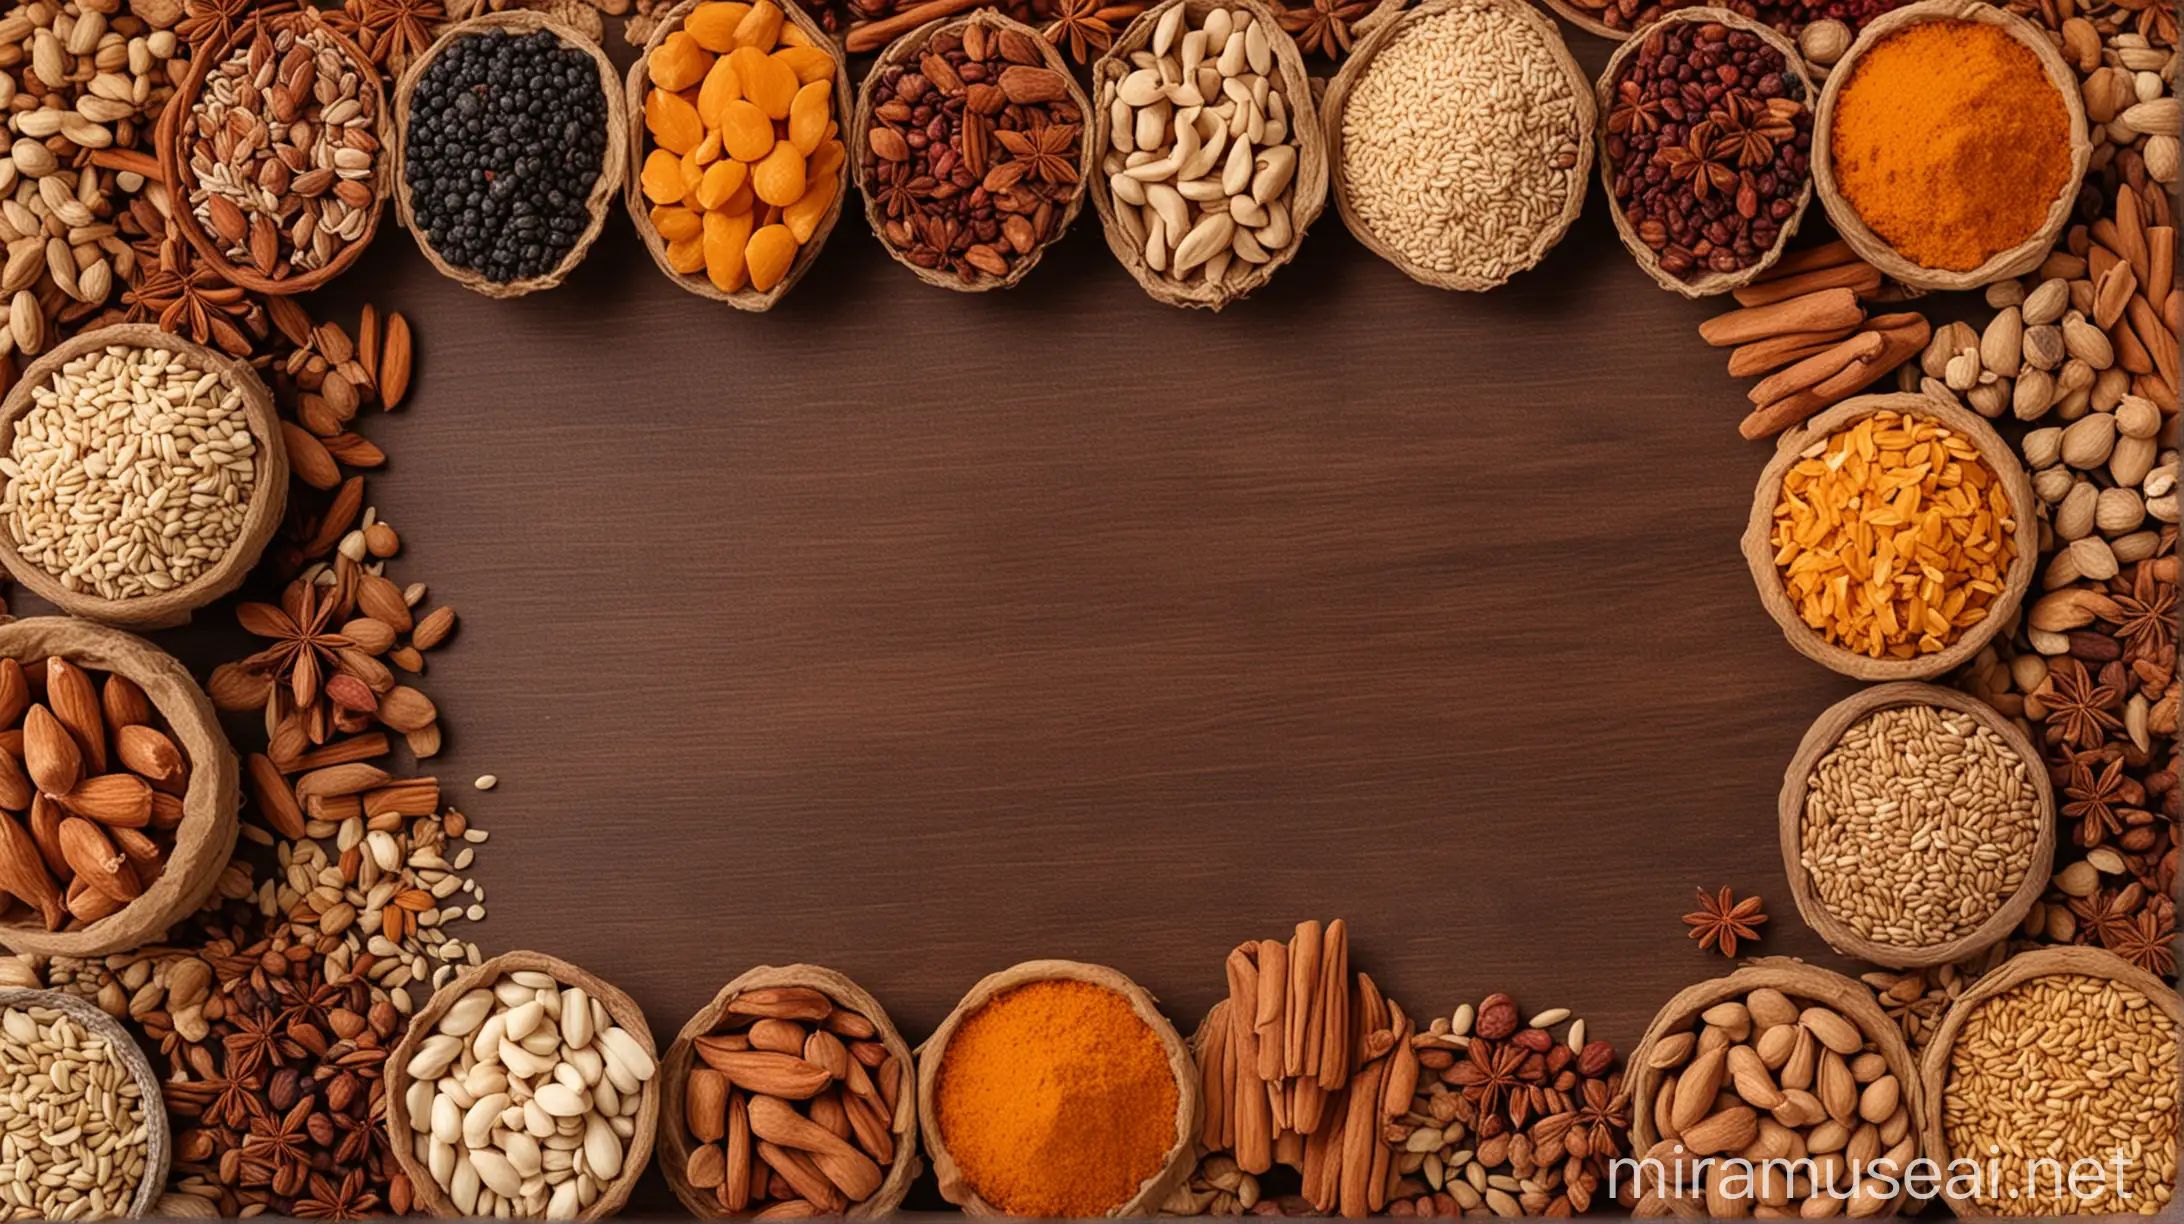 Colorful Arrangement of Grains Spices and Dry Fruits